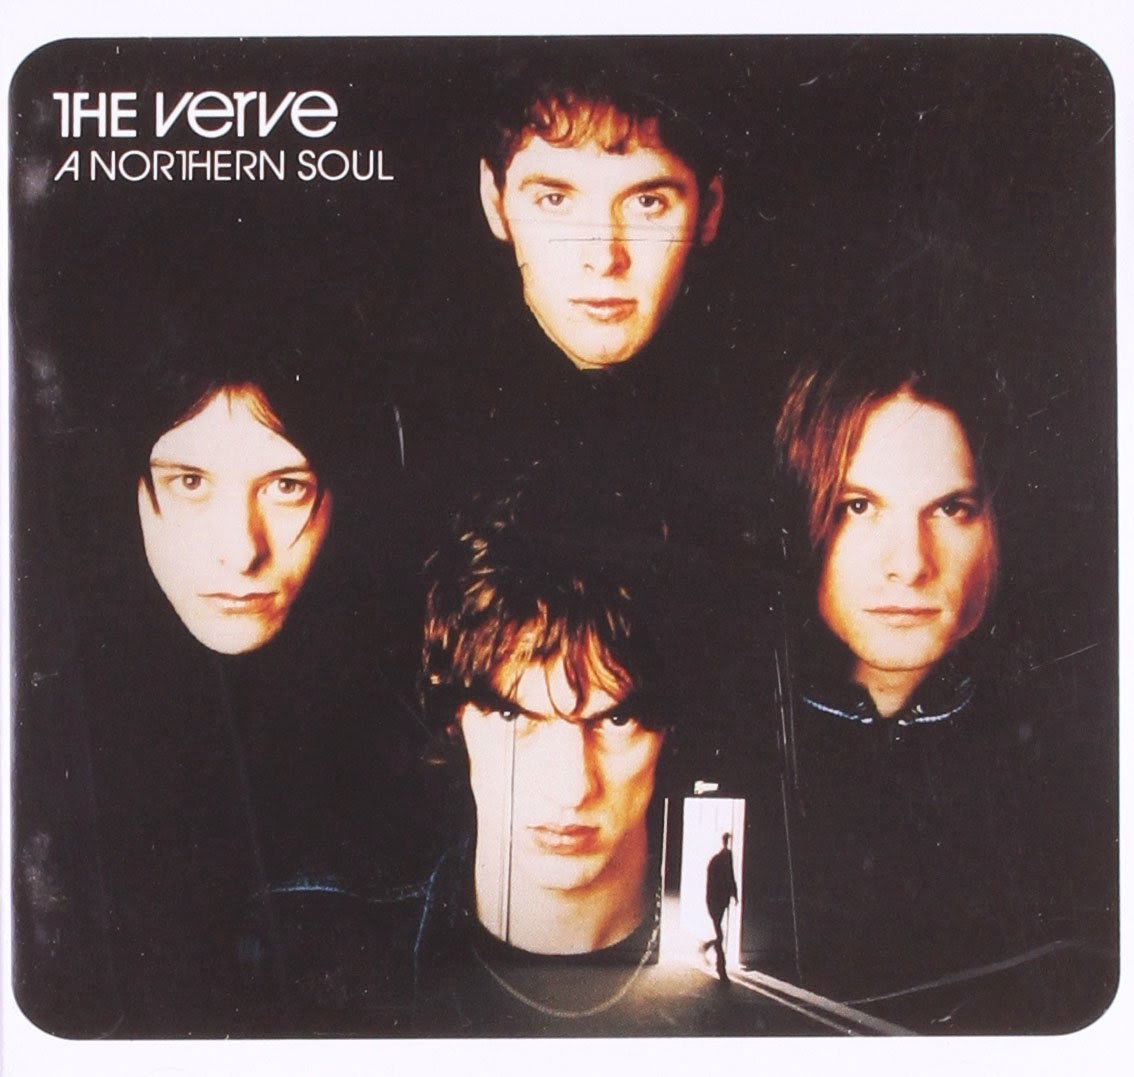 A Northern Soul by The Verve - Classic Album Reviews